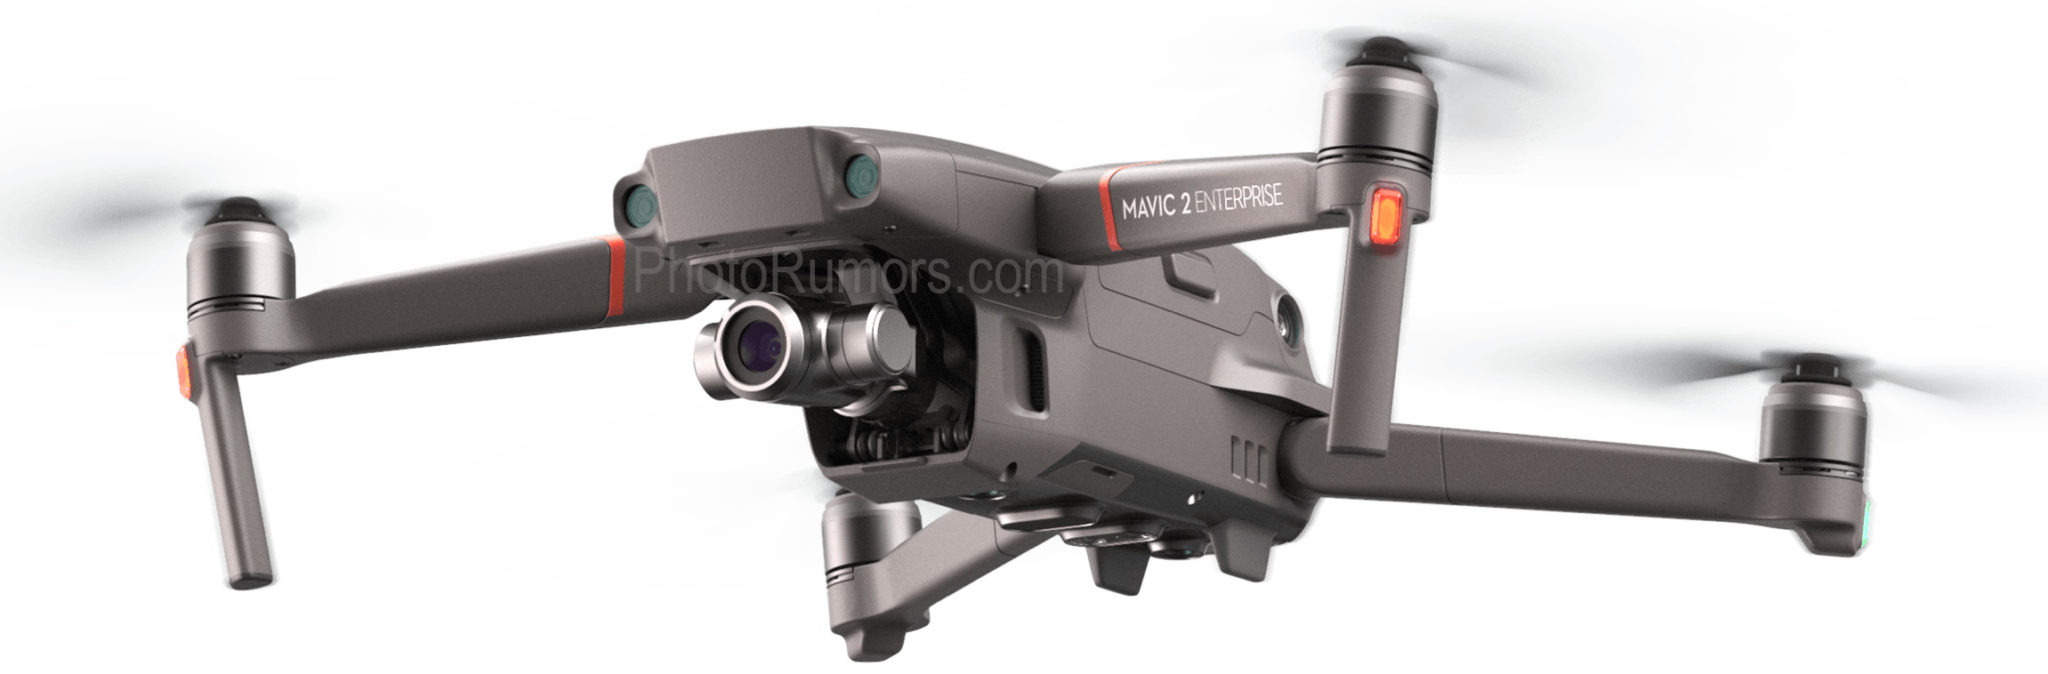 What We Know About the Leaked DJI Mavic 2 Line So Far